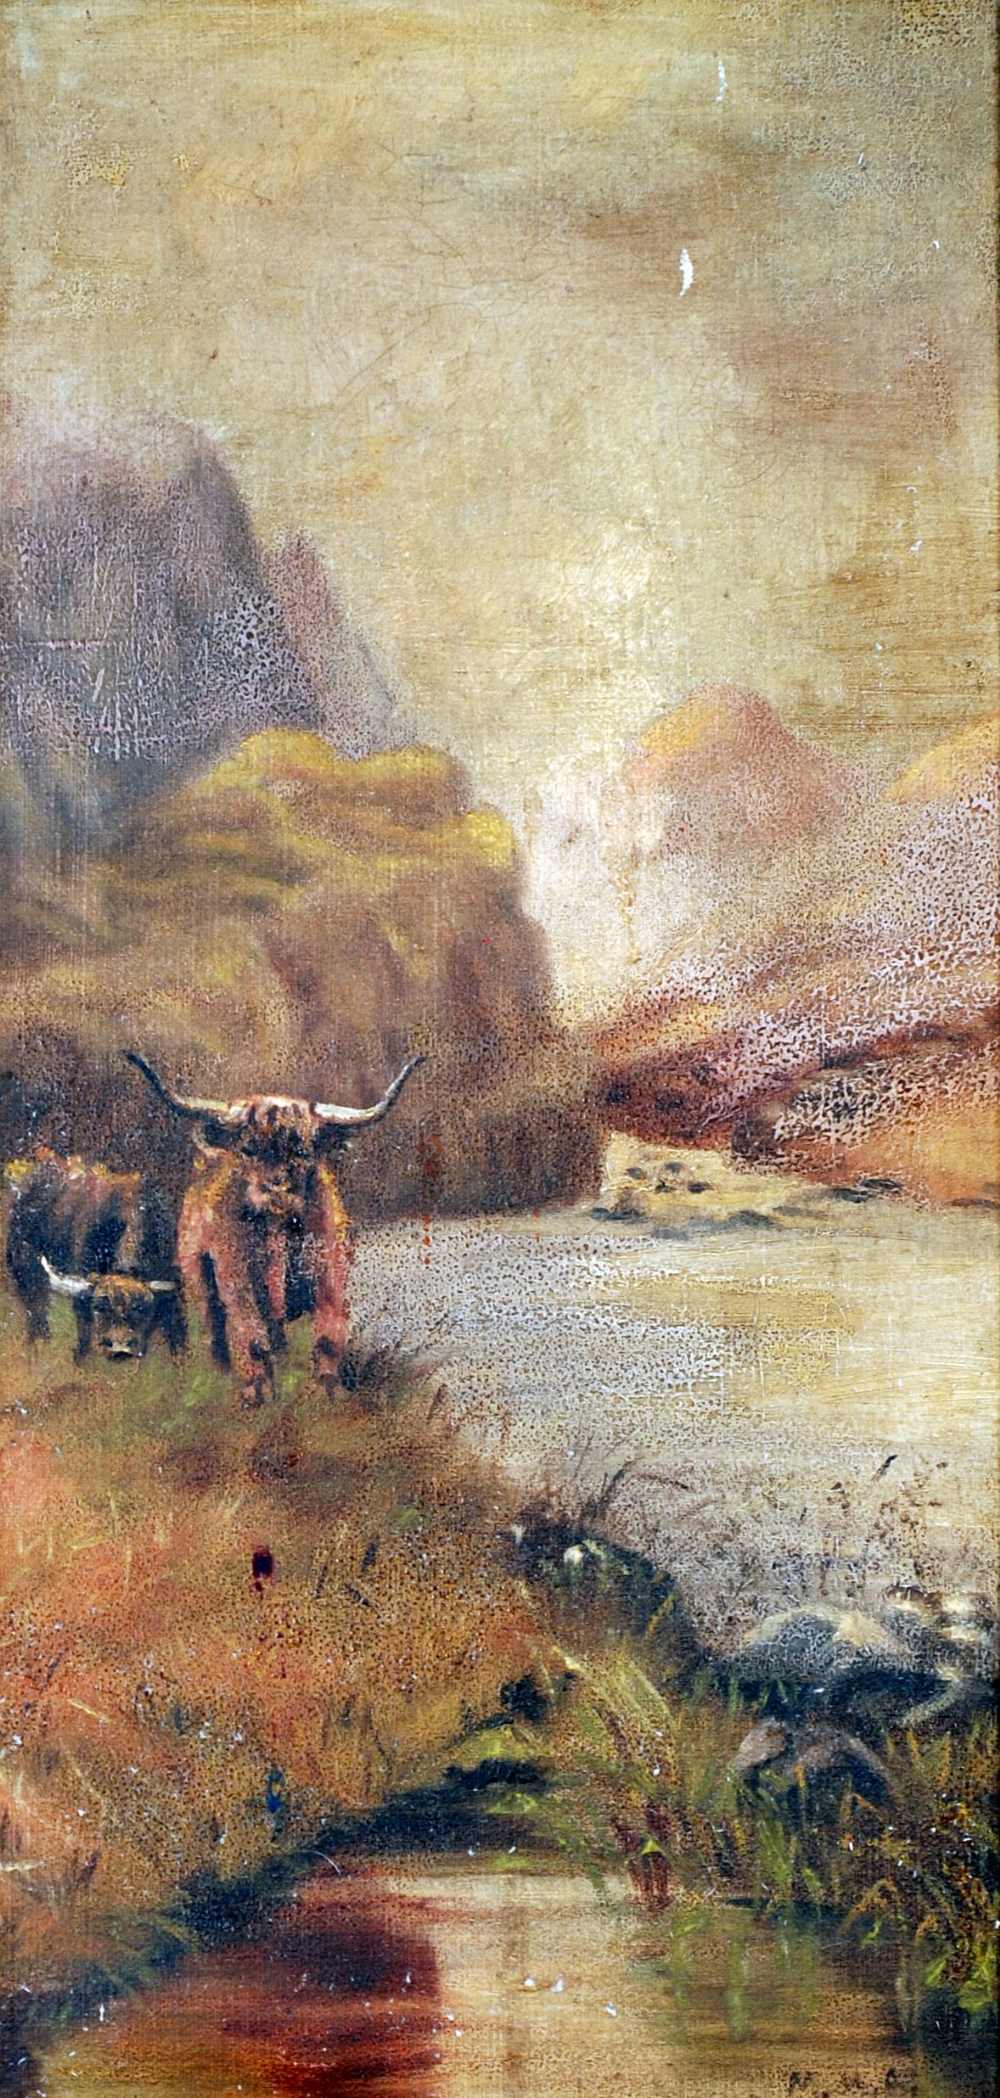 M.M.A. PAIR OF OIL PAINTINGS ON CANVAS Long horn cattle and stags at water in highland river